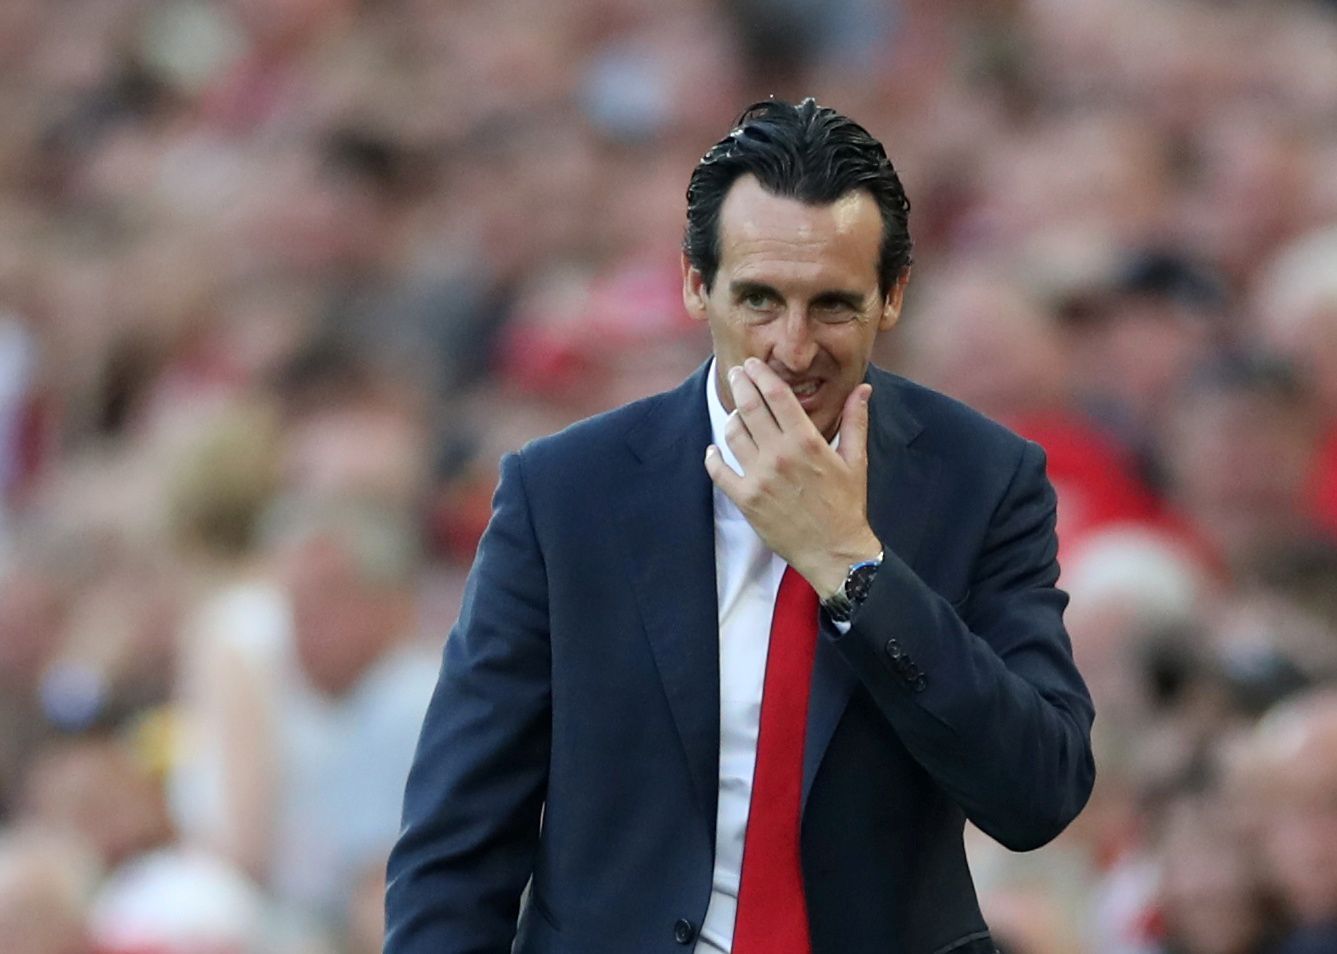 Soccer Football - Premier League - Liverpool v Arsenal - Anfield, Liverpool, Britain - August 24, 2019  Arsenal manager Unai Emery reacts Action Images via Reuters/Carl Recine  EDITORIAL USE ONLY. No use with unauthorized audio, video, data, fixture lists, club/league logos or 